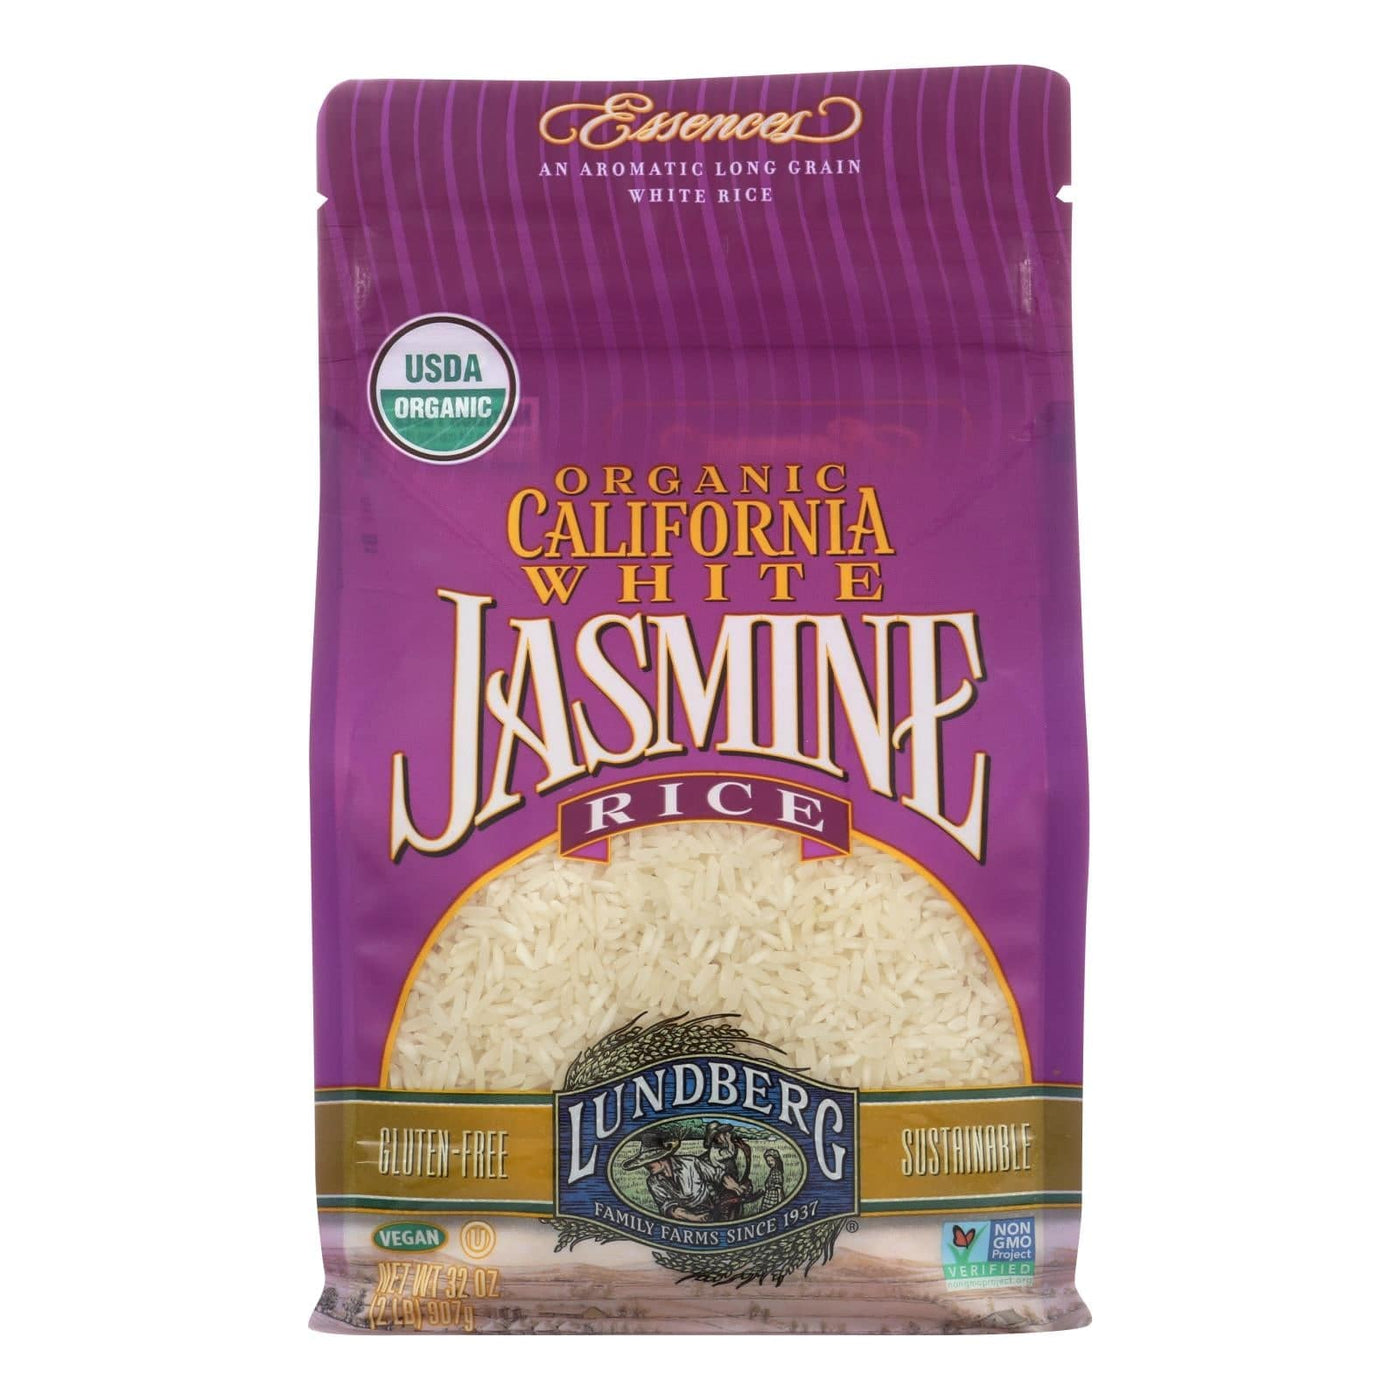 Buy Lundberg Family Farms Organic California White Jasmine Rice - Case Of 6 - 2 Lb.  at OnlyNaturals.us